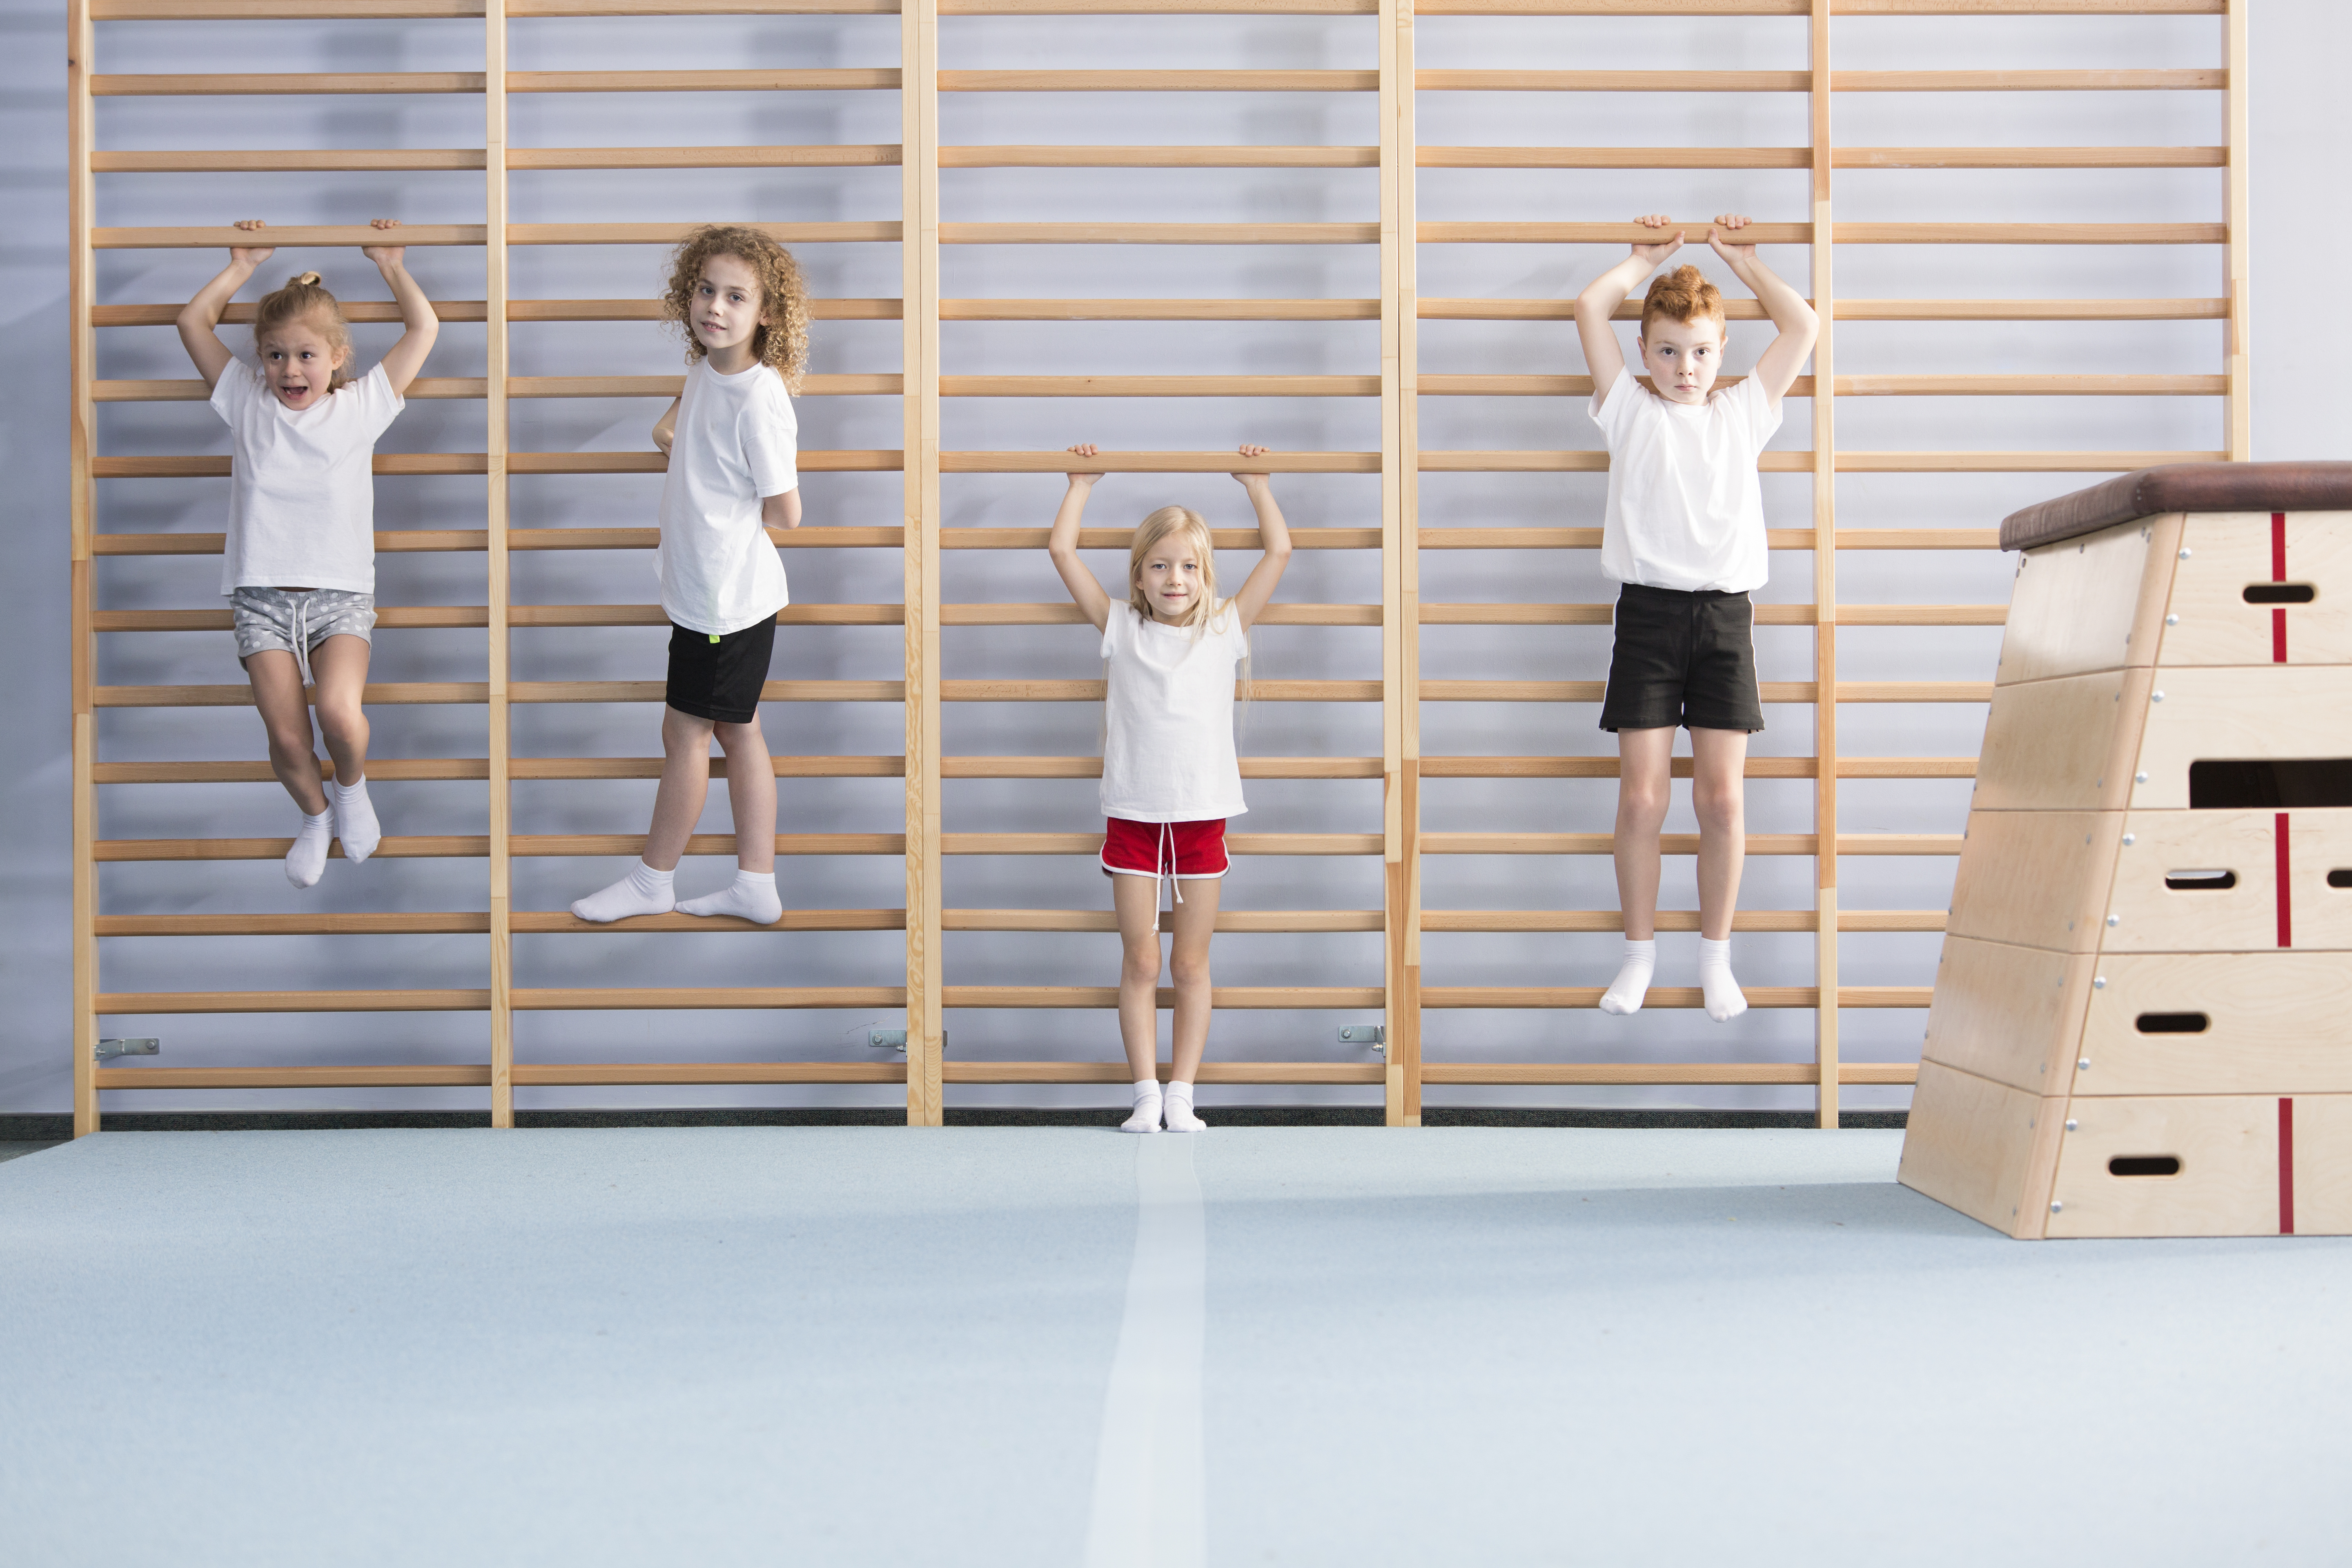 Young, active school boys and girls standing and hanging from wall bars, warming up for physical education athletics class